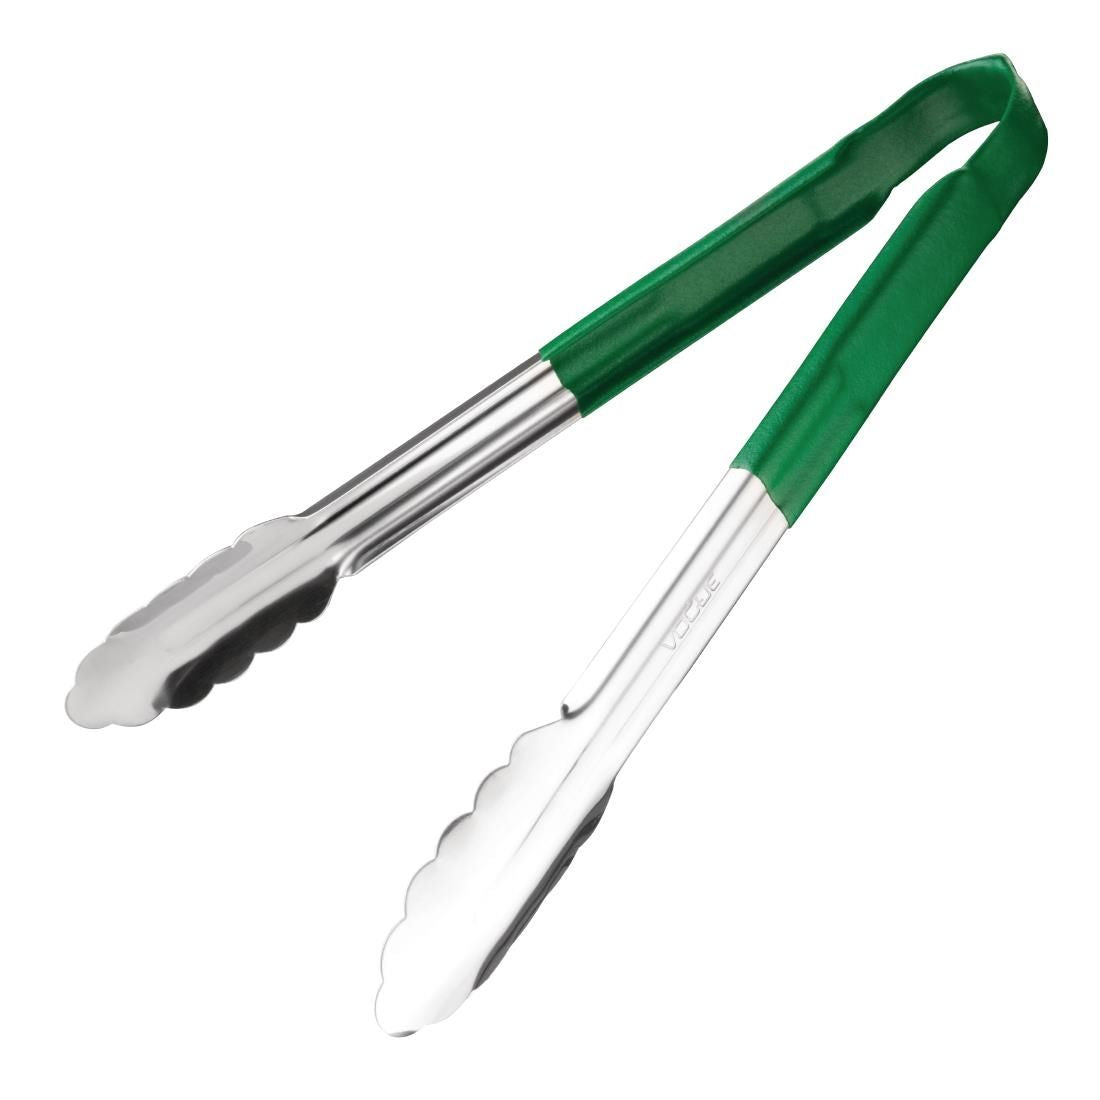 CB155 Vogue Colour Coded Green Serving Tongs 11"